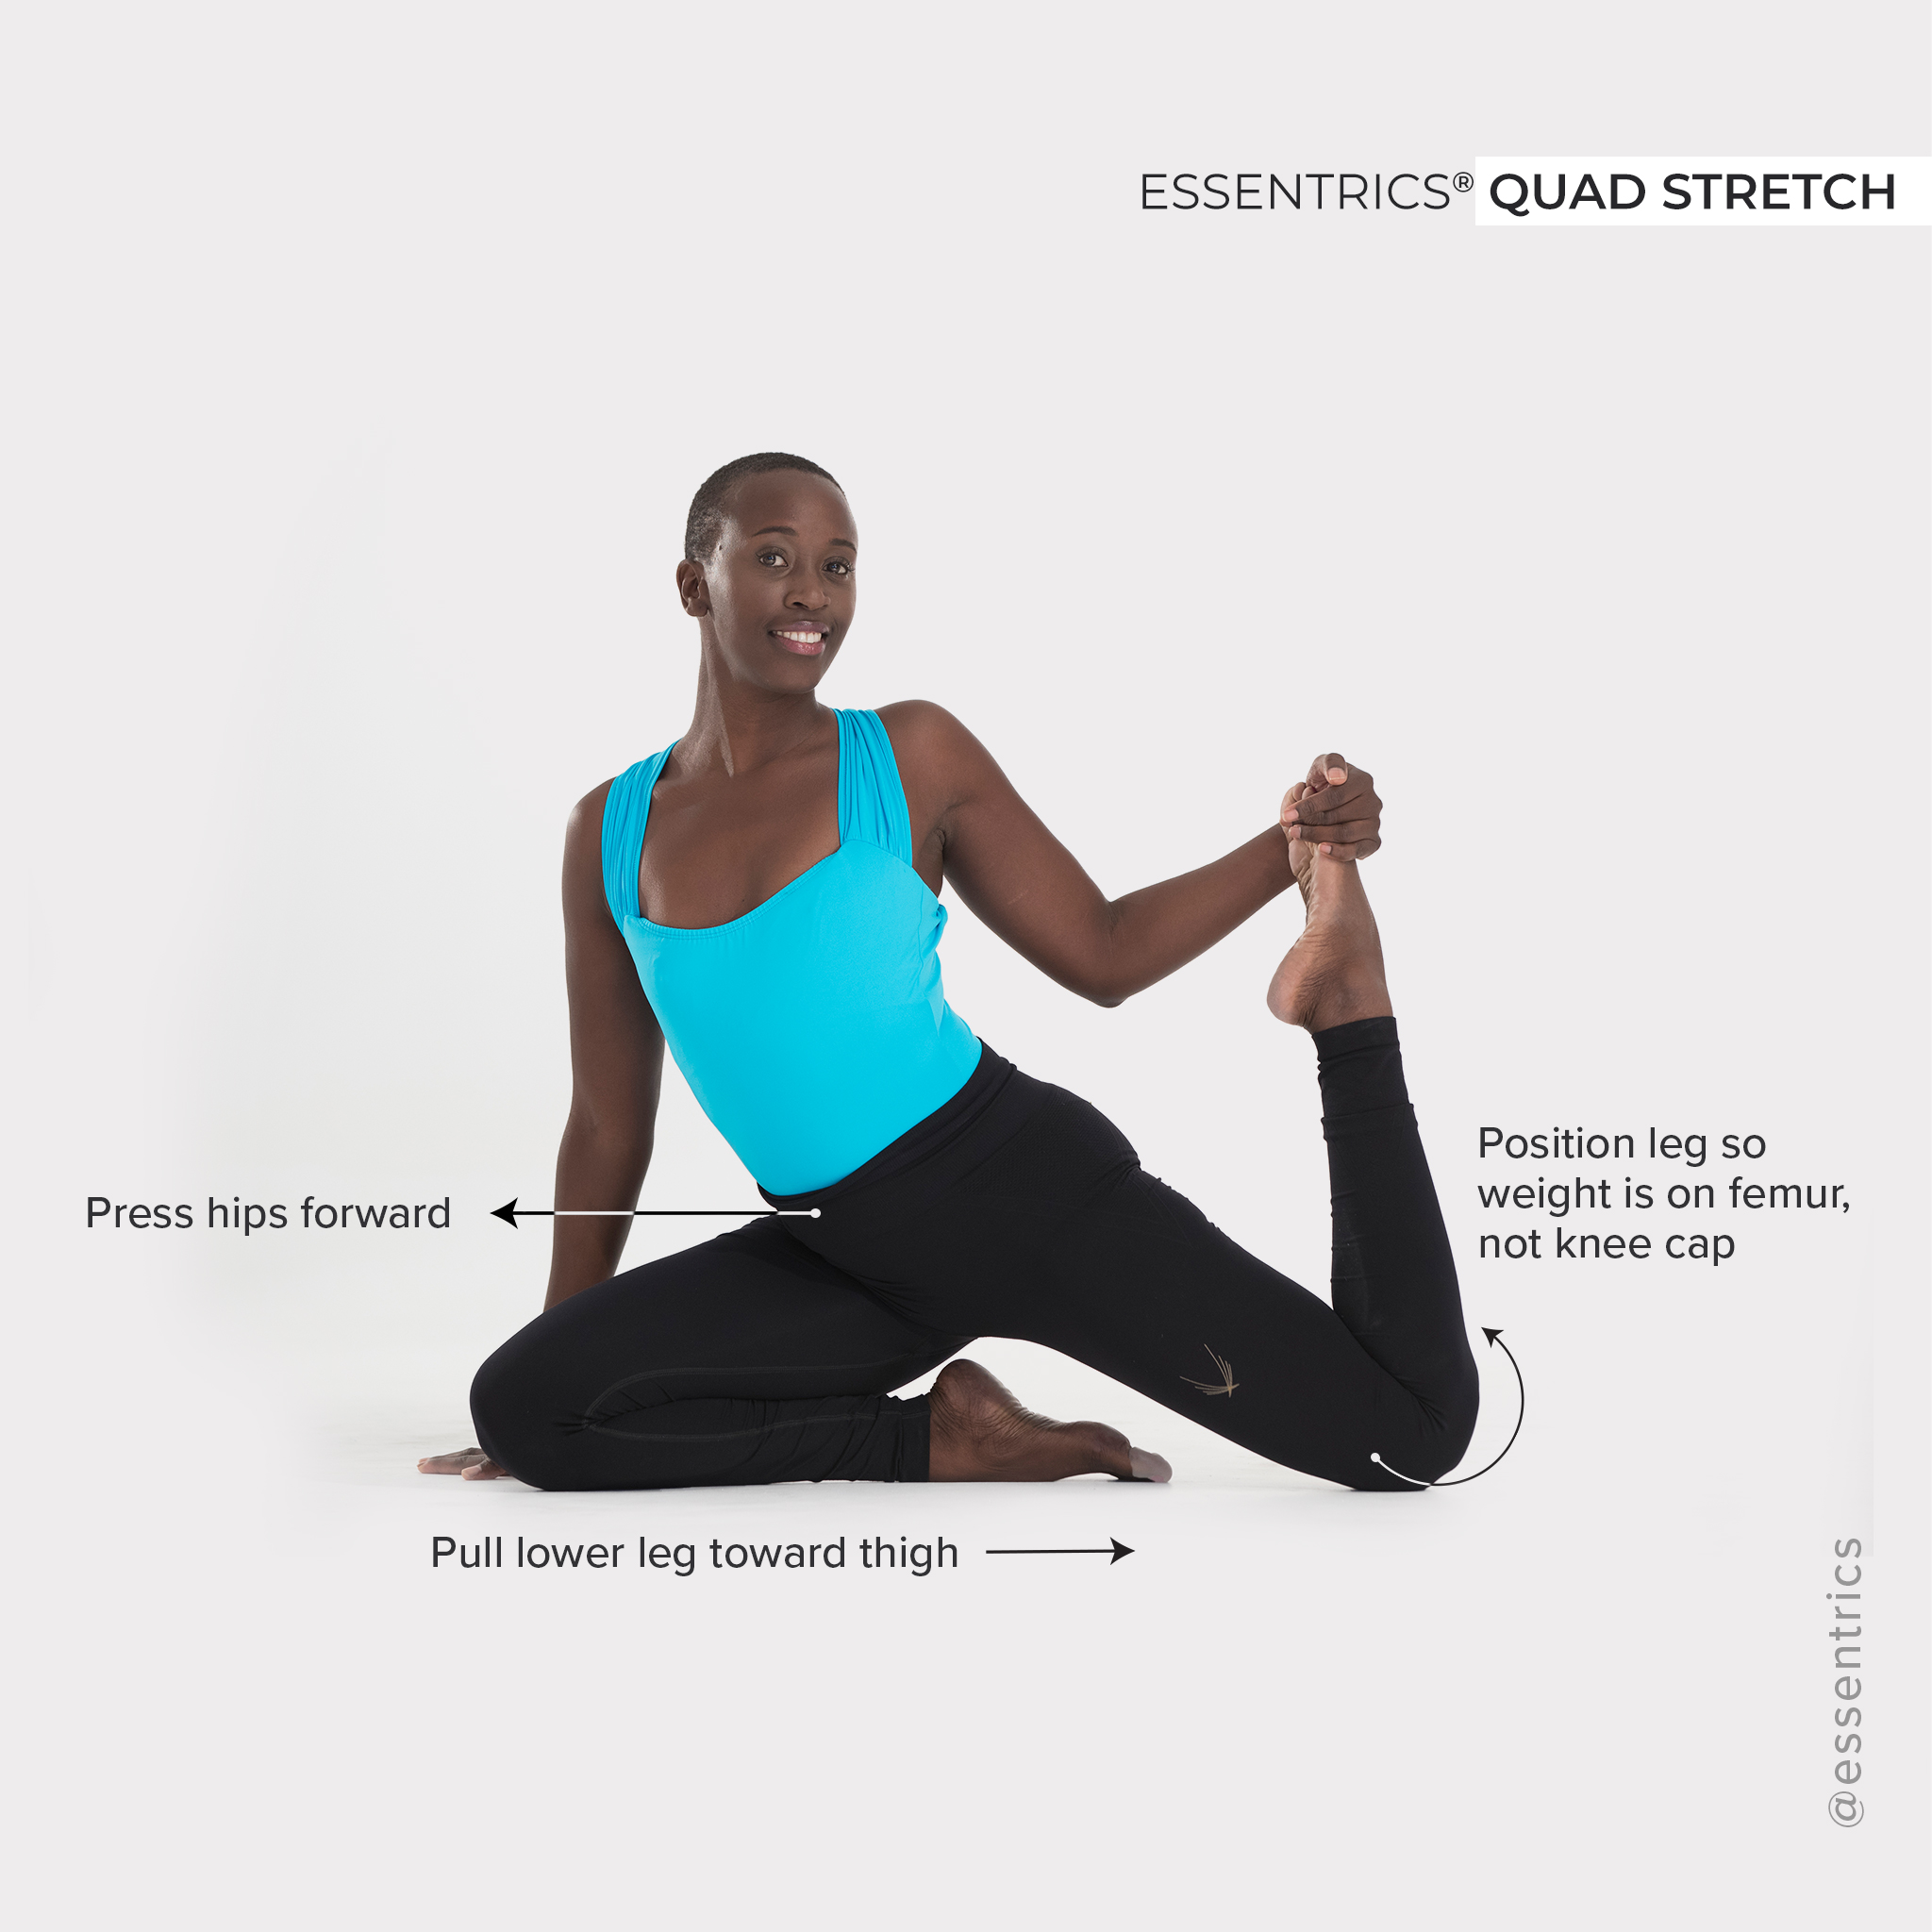 4 Exercises to Target Your Hips, Knees, and Glutes - Essentrics